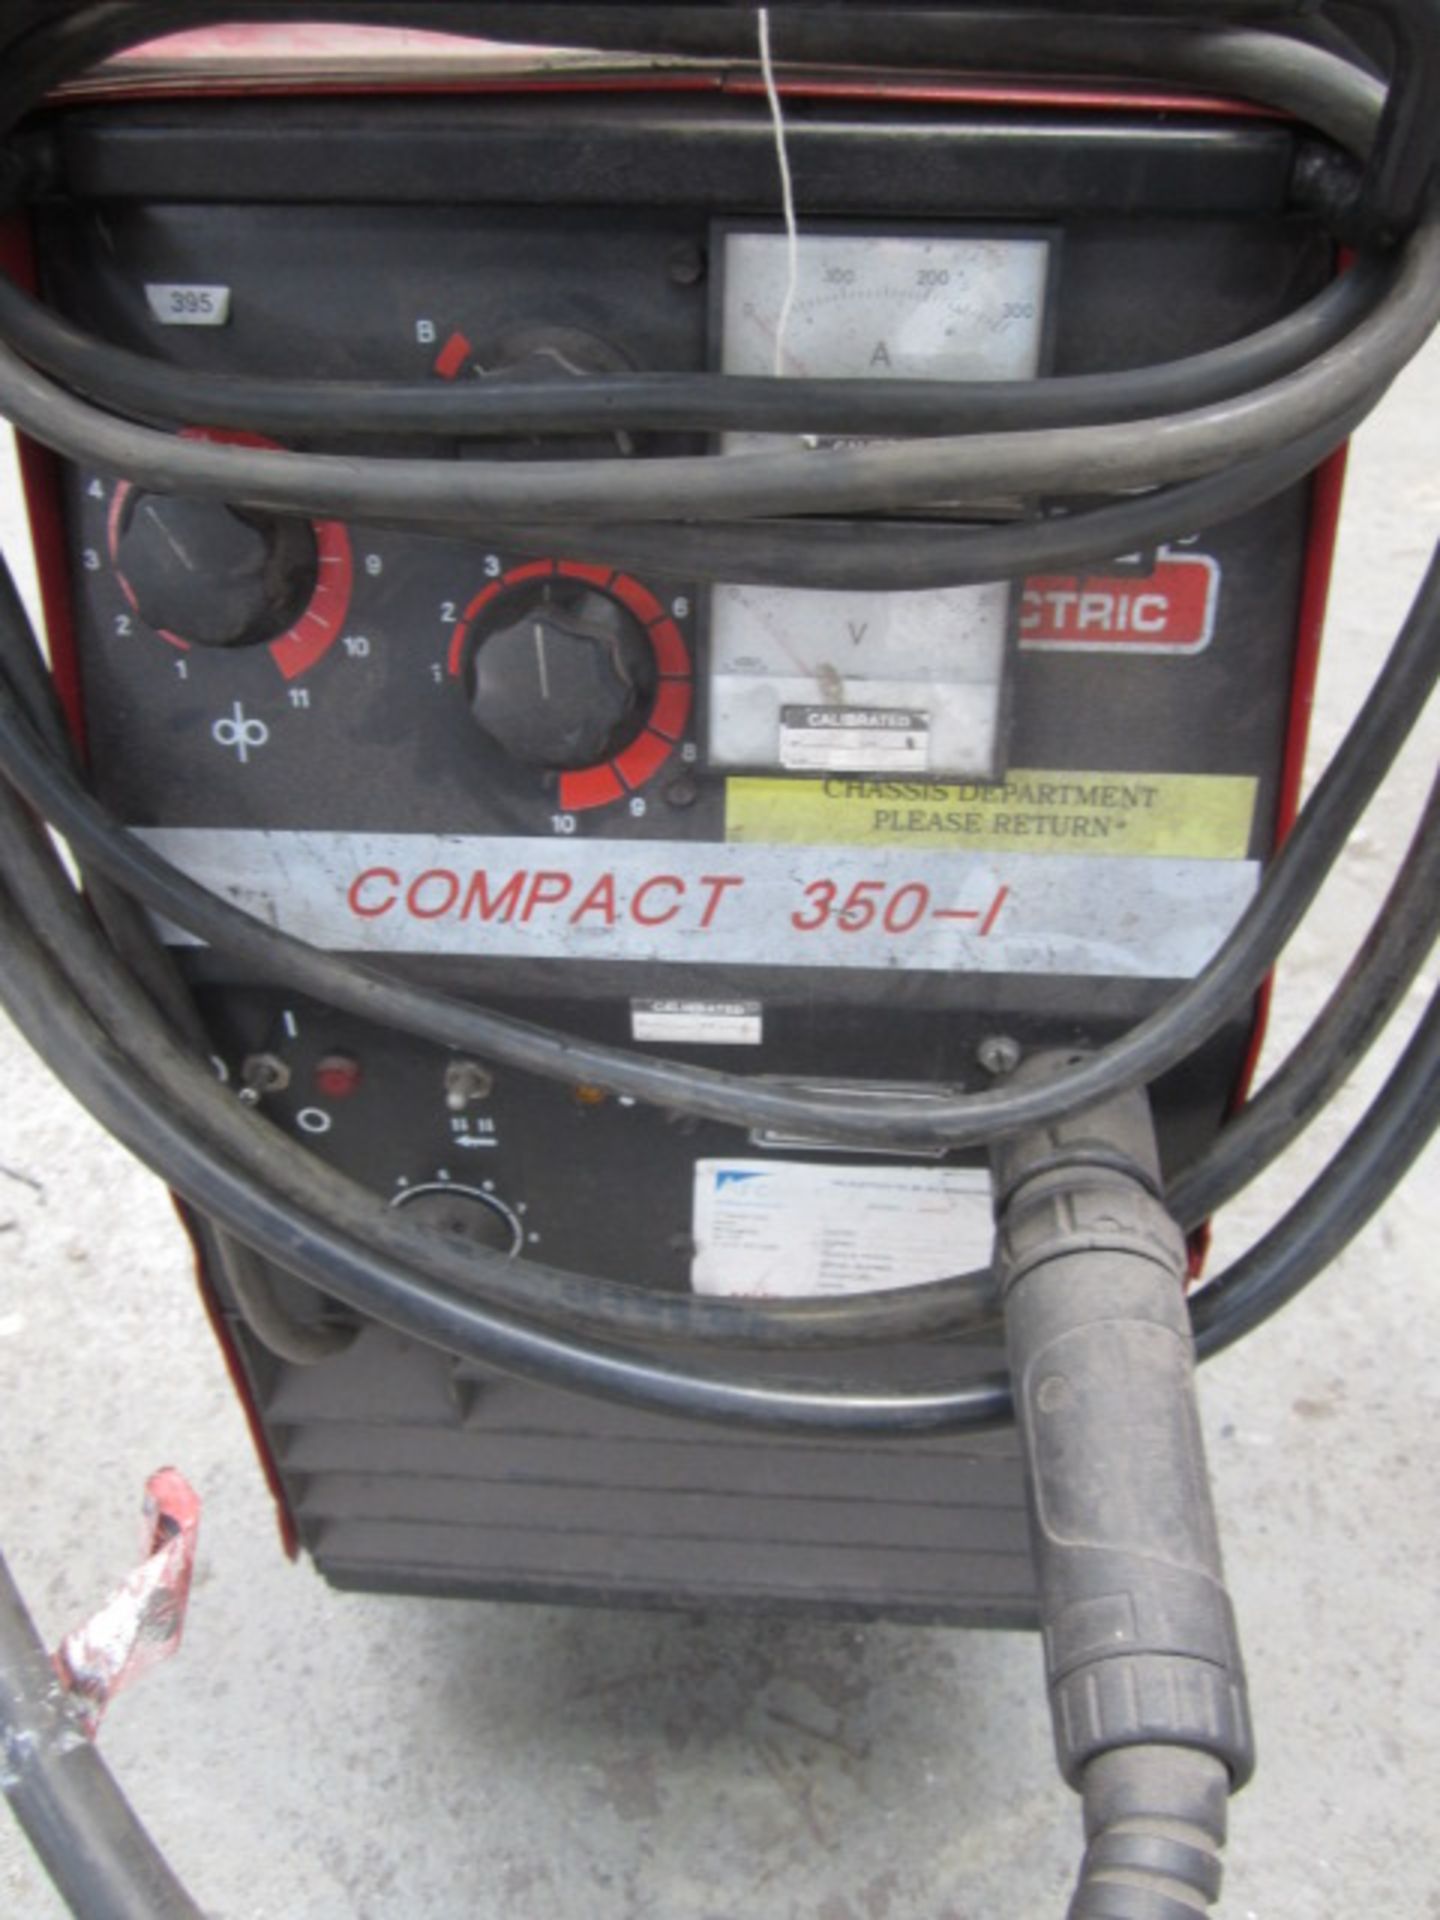 Lincoln electric compact 3501 - excluding gas bottle. - Image 2 of 4